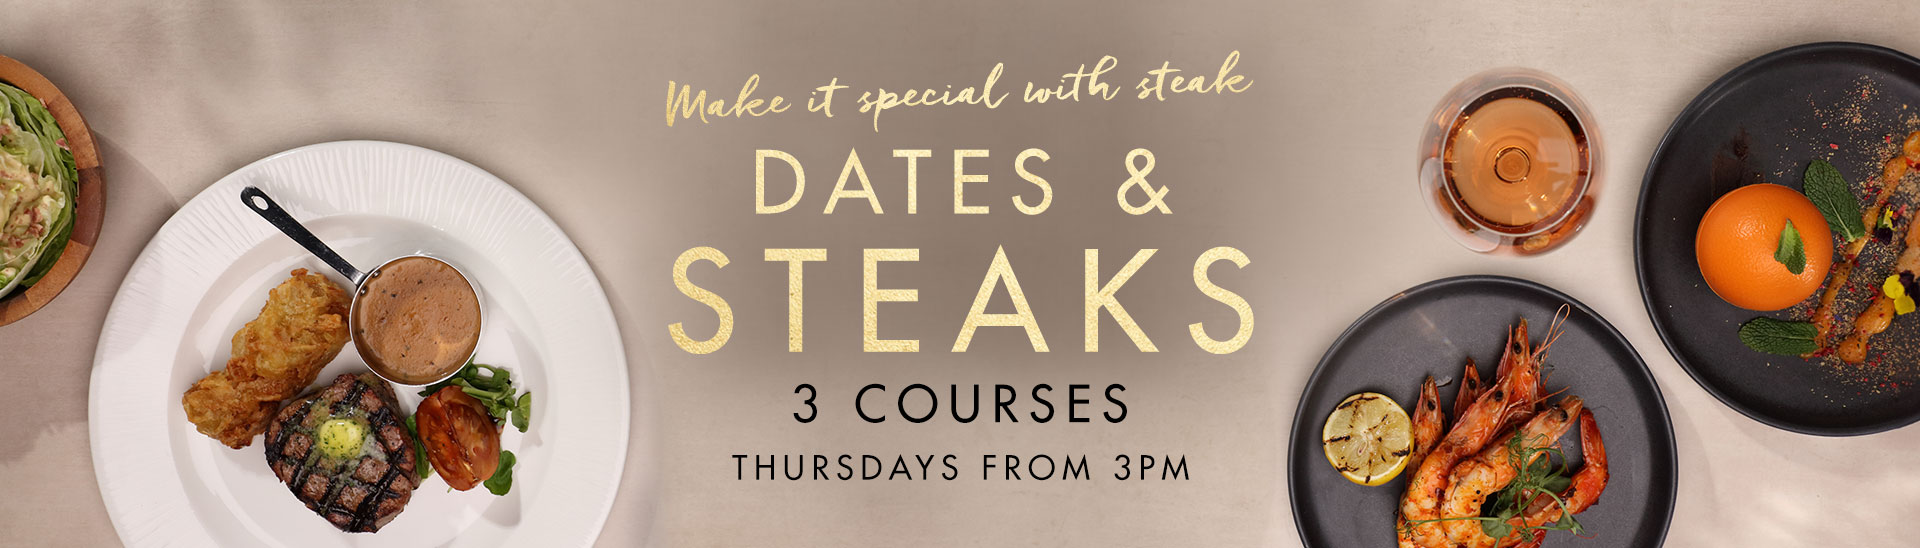 Dates & Steaks at Miller & Carter Rayleigh